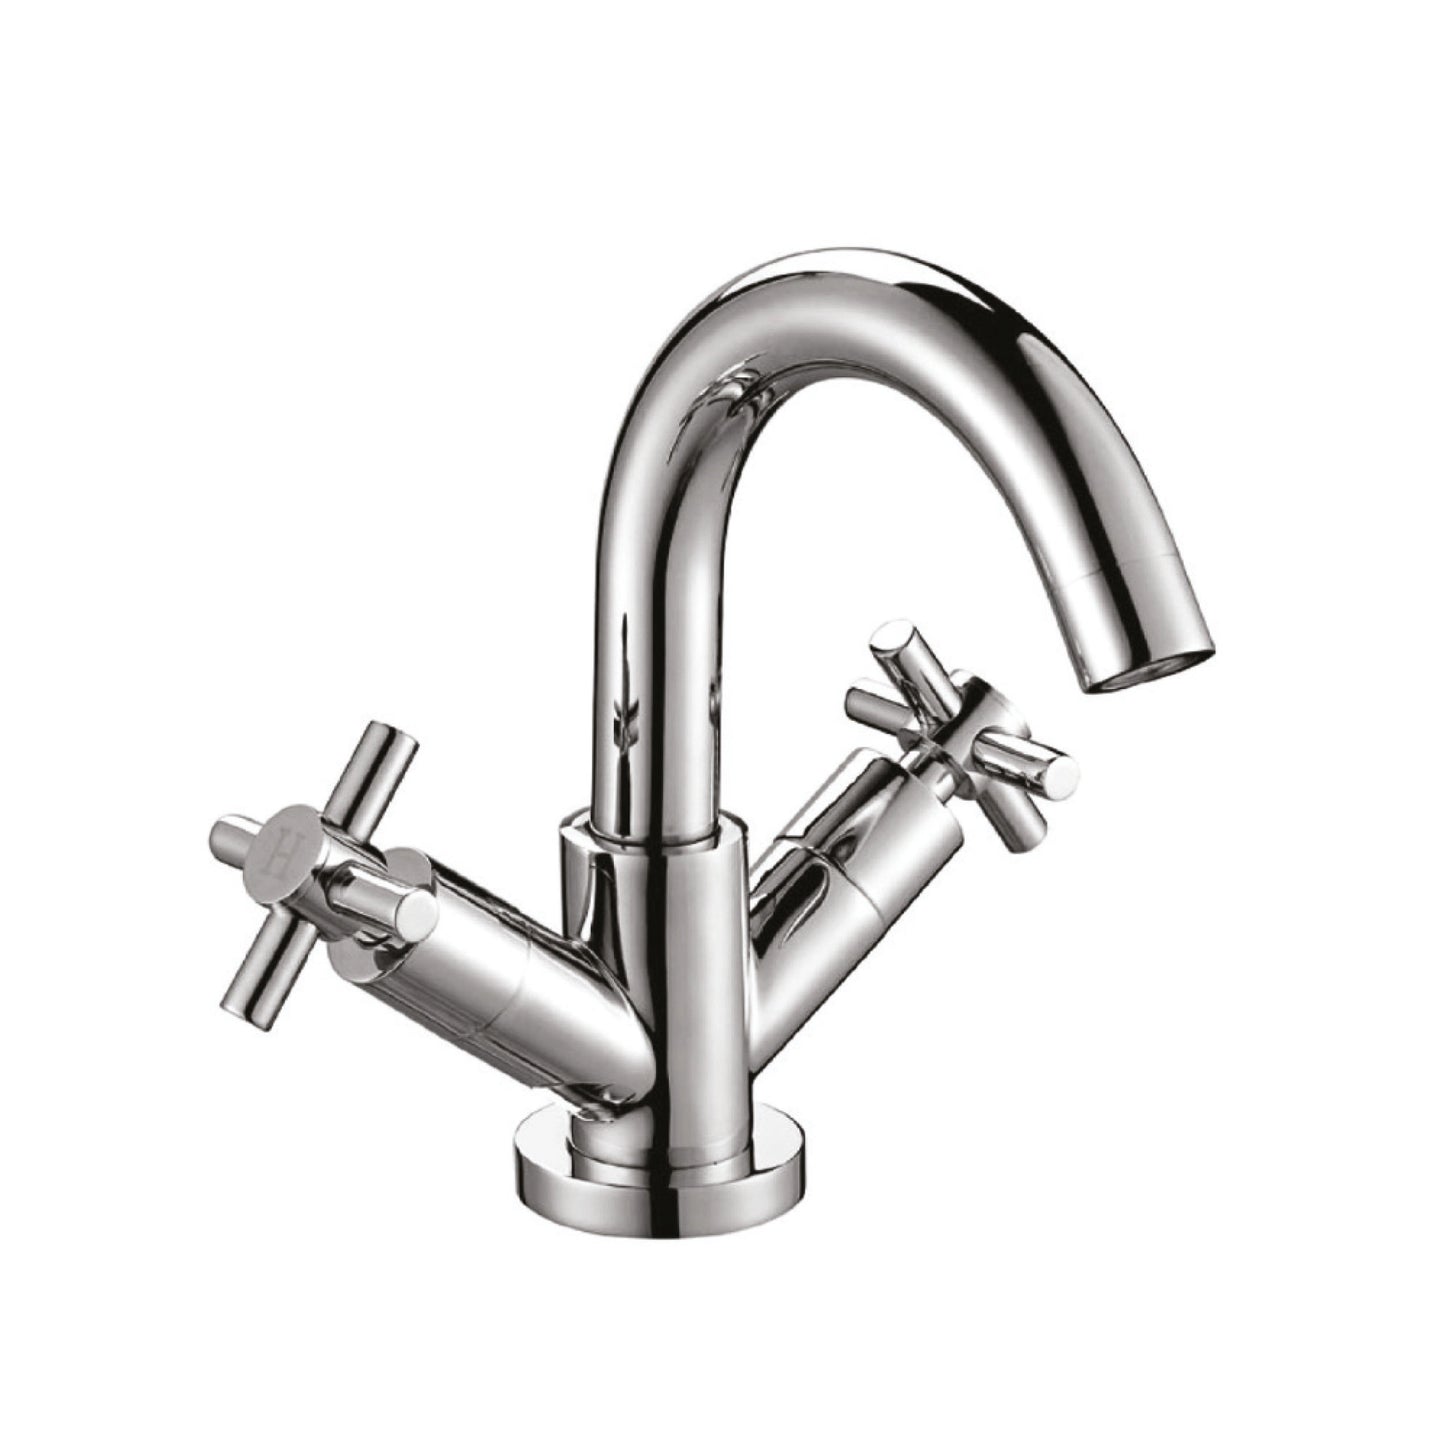 Kross Mono Side Lever Basin Mixer Tap with Push Waste